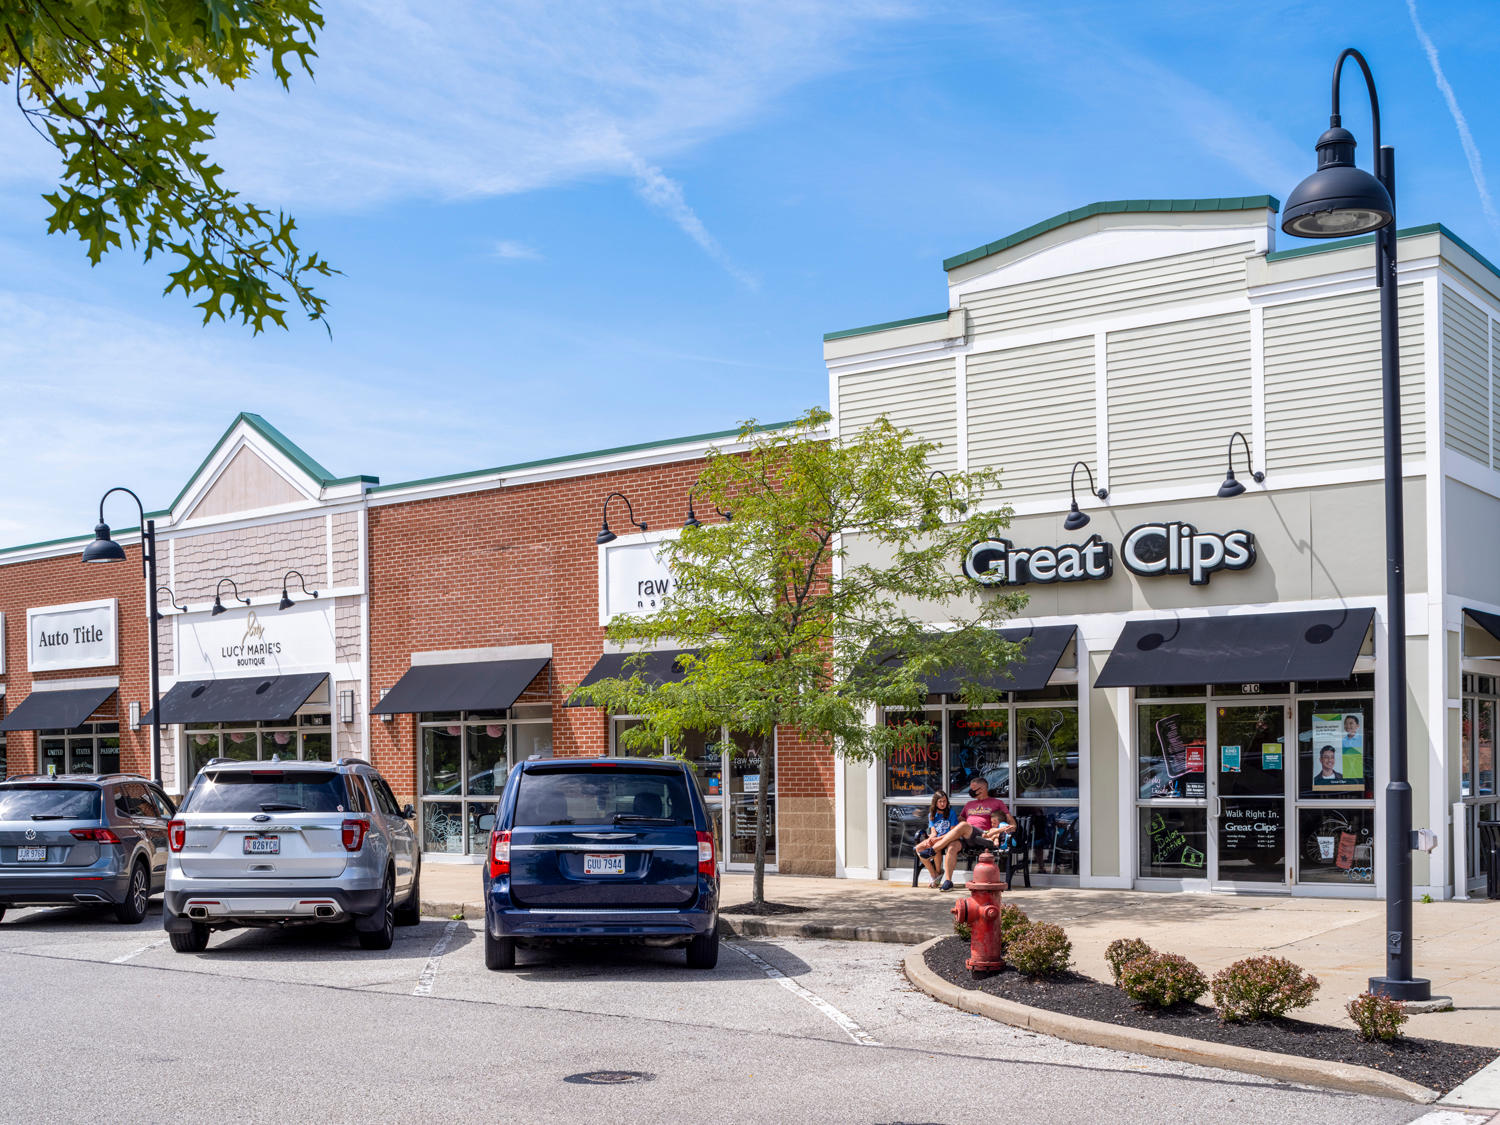 Great Clips at Brunswick Town Center Shopping Center